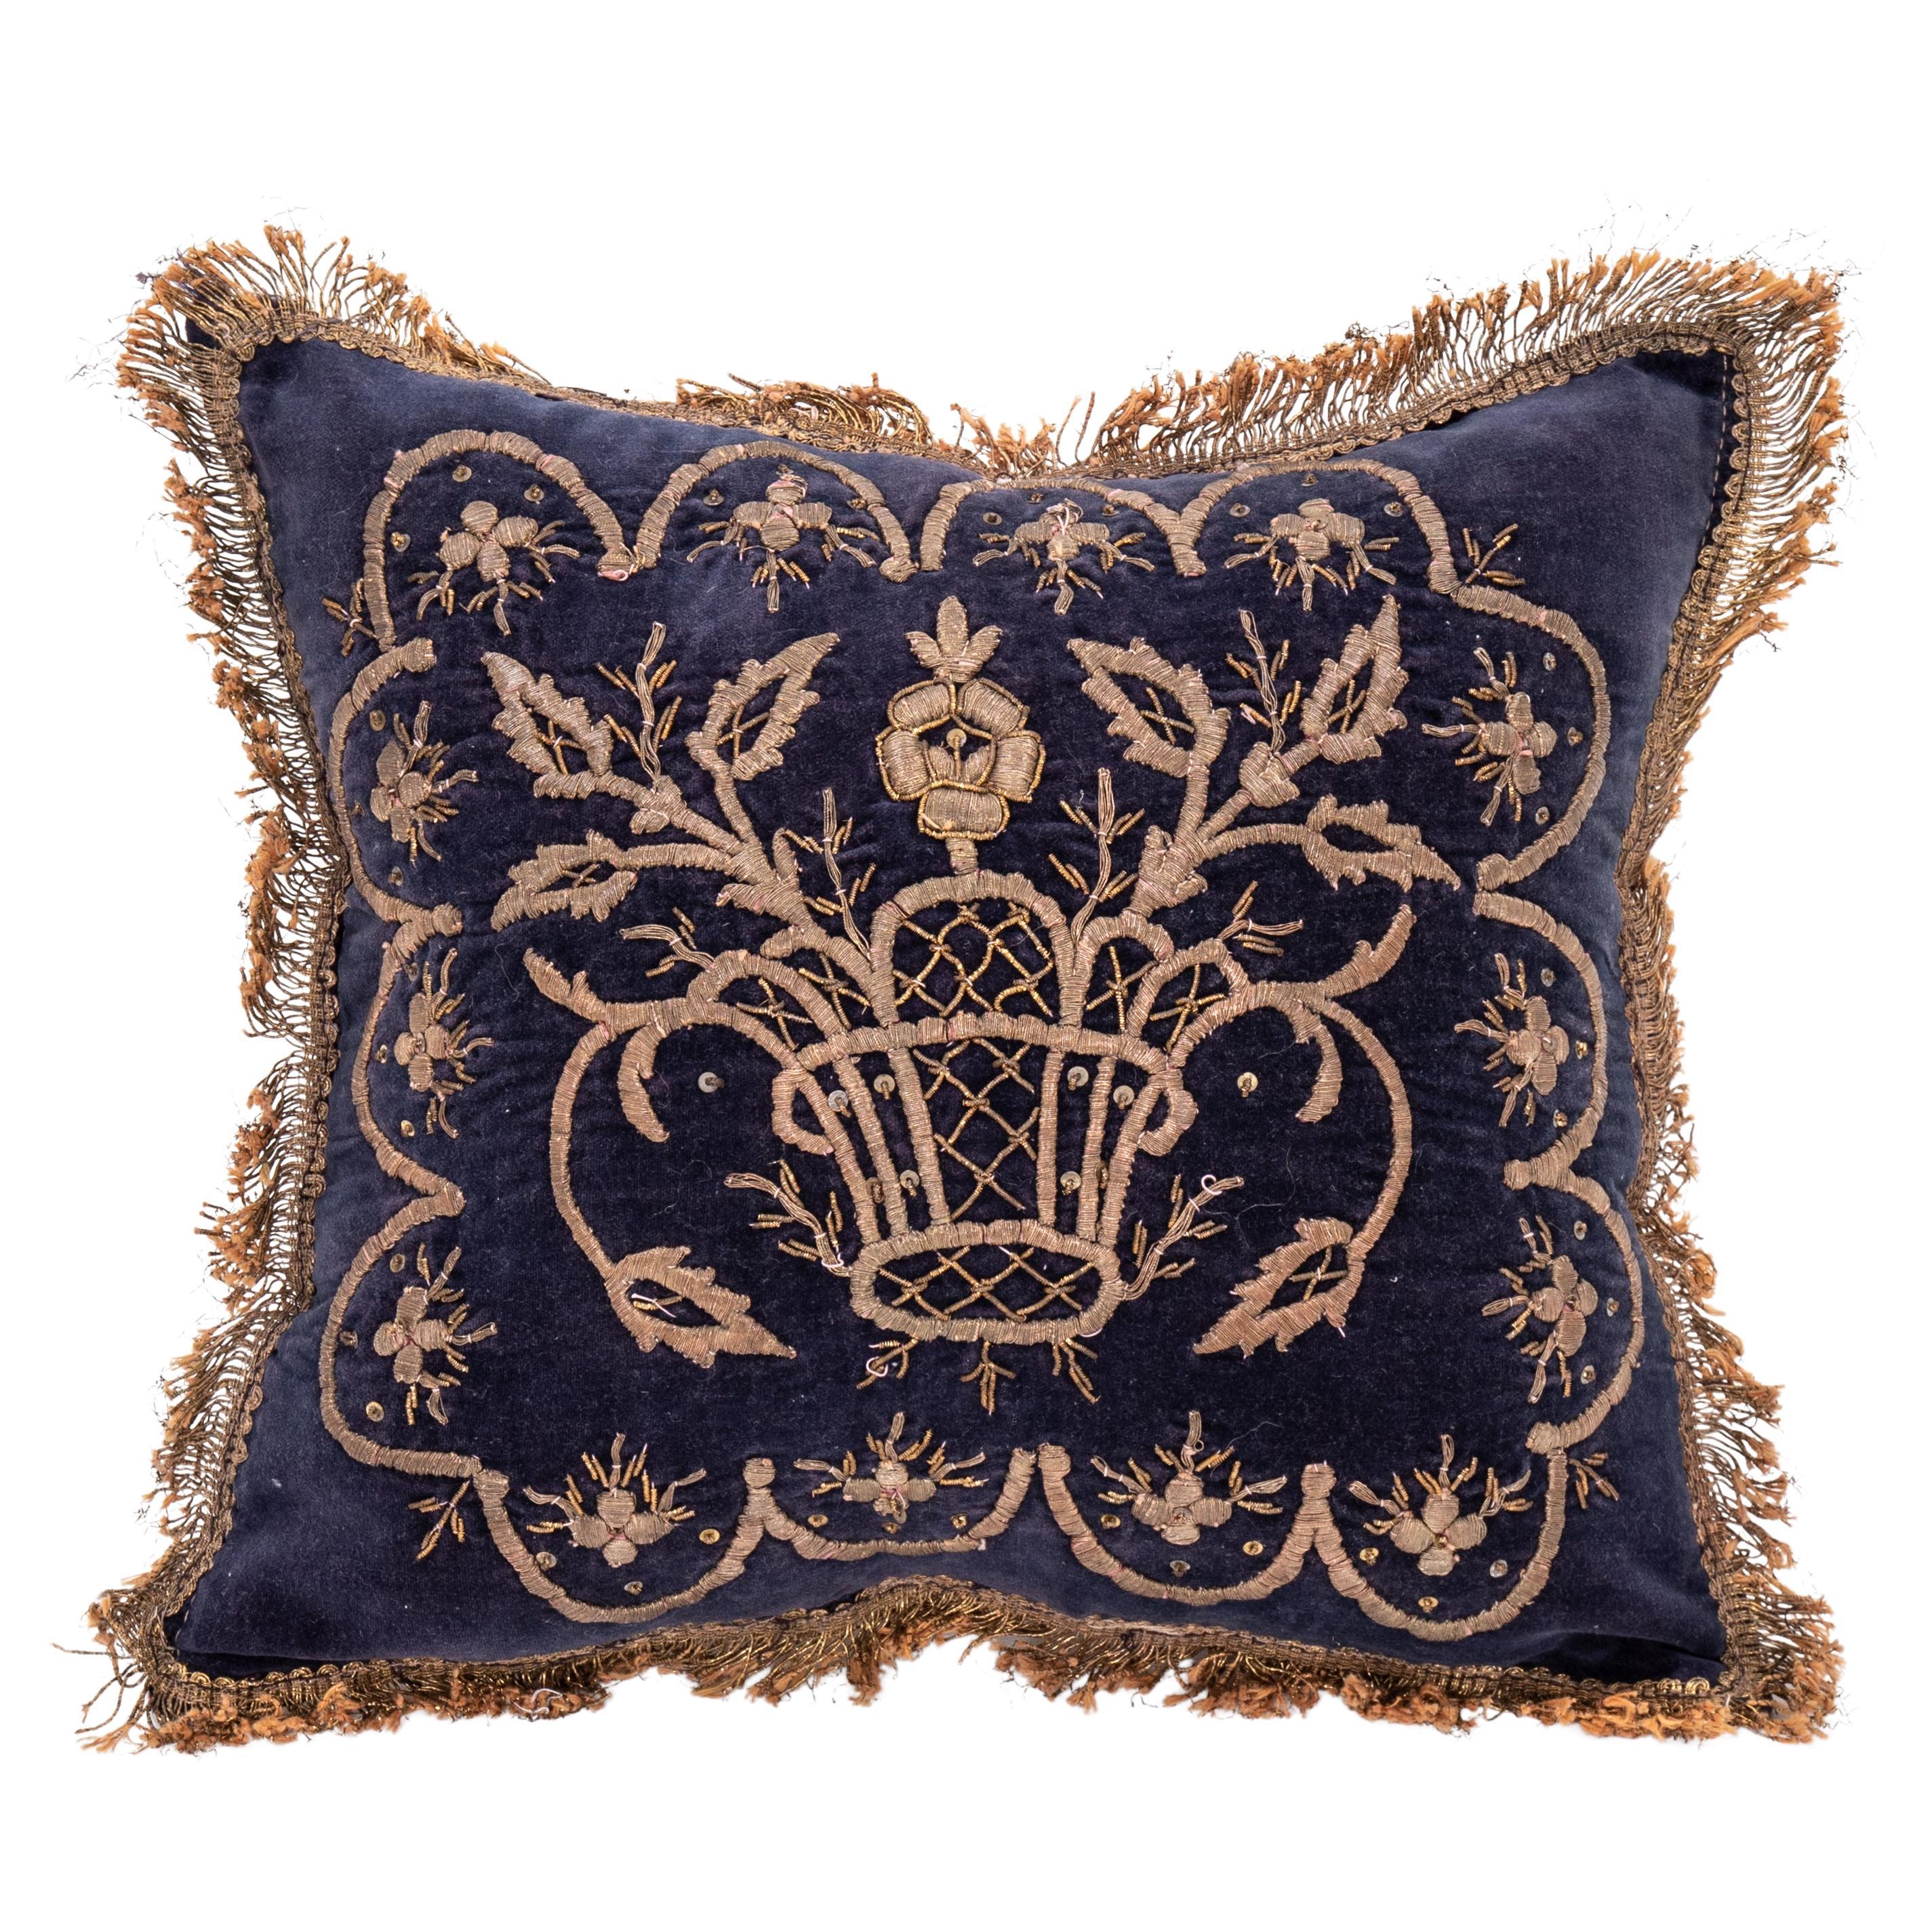 Ottoman / Turkish Pillow Cover in Sarma Technique, late 19th / Early 20th C.